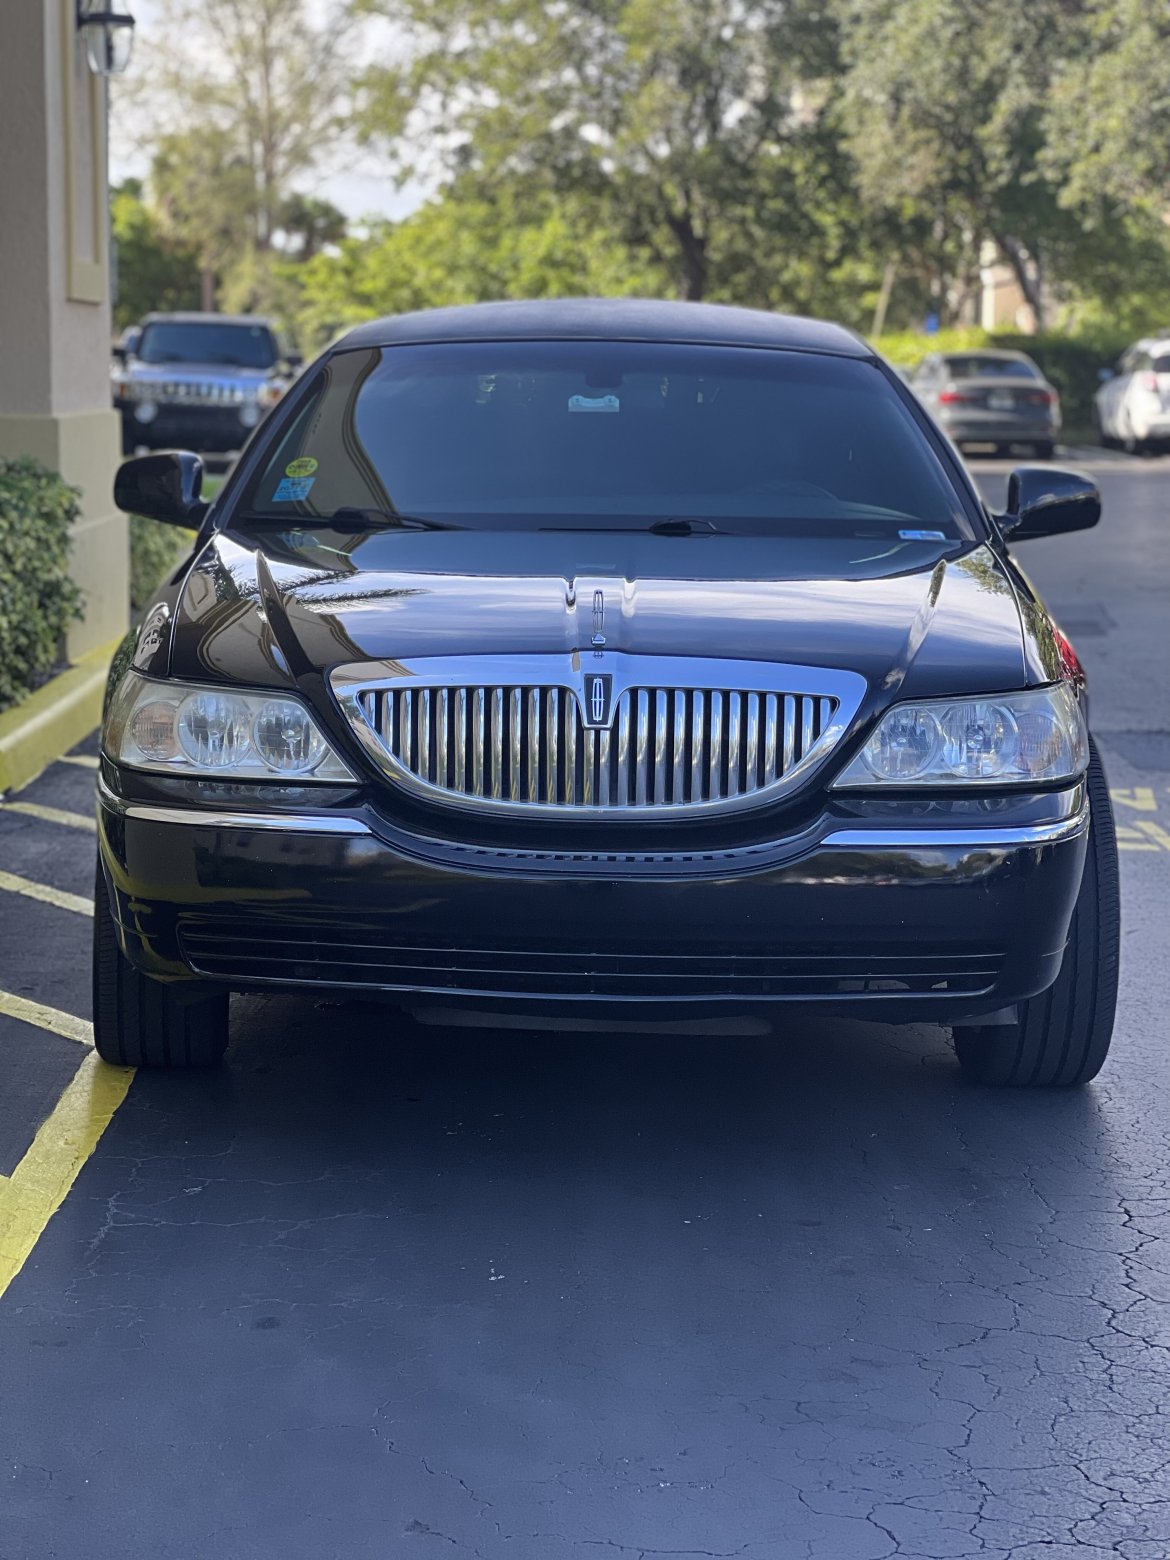 Limousine for sale: 2010 Lincoln Town Car 120&quot; by Executive coach